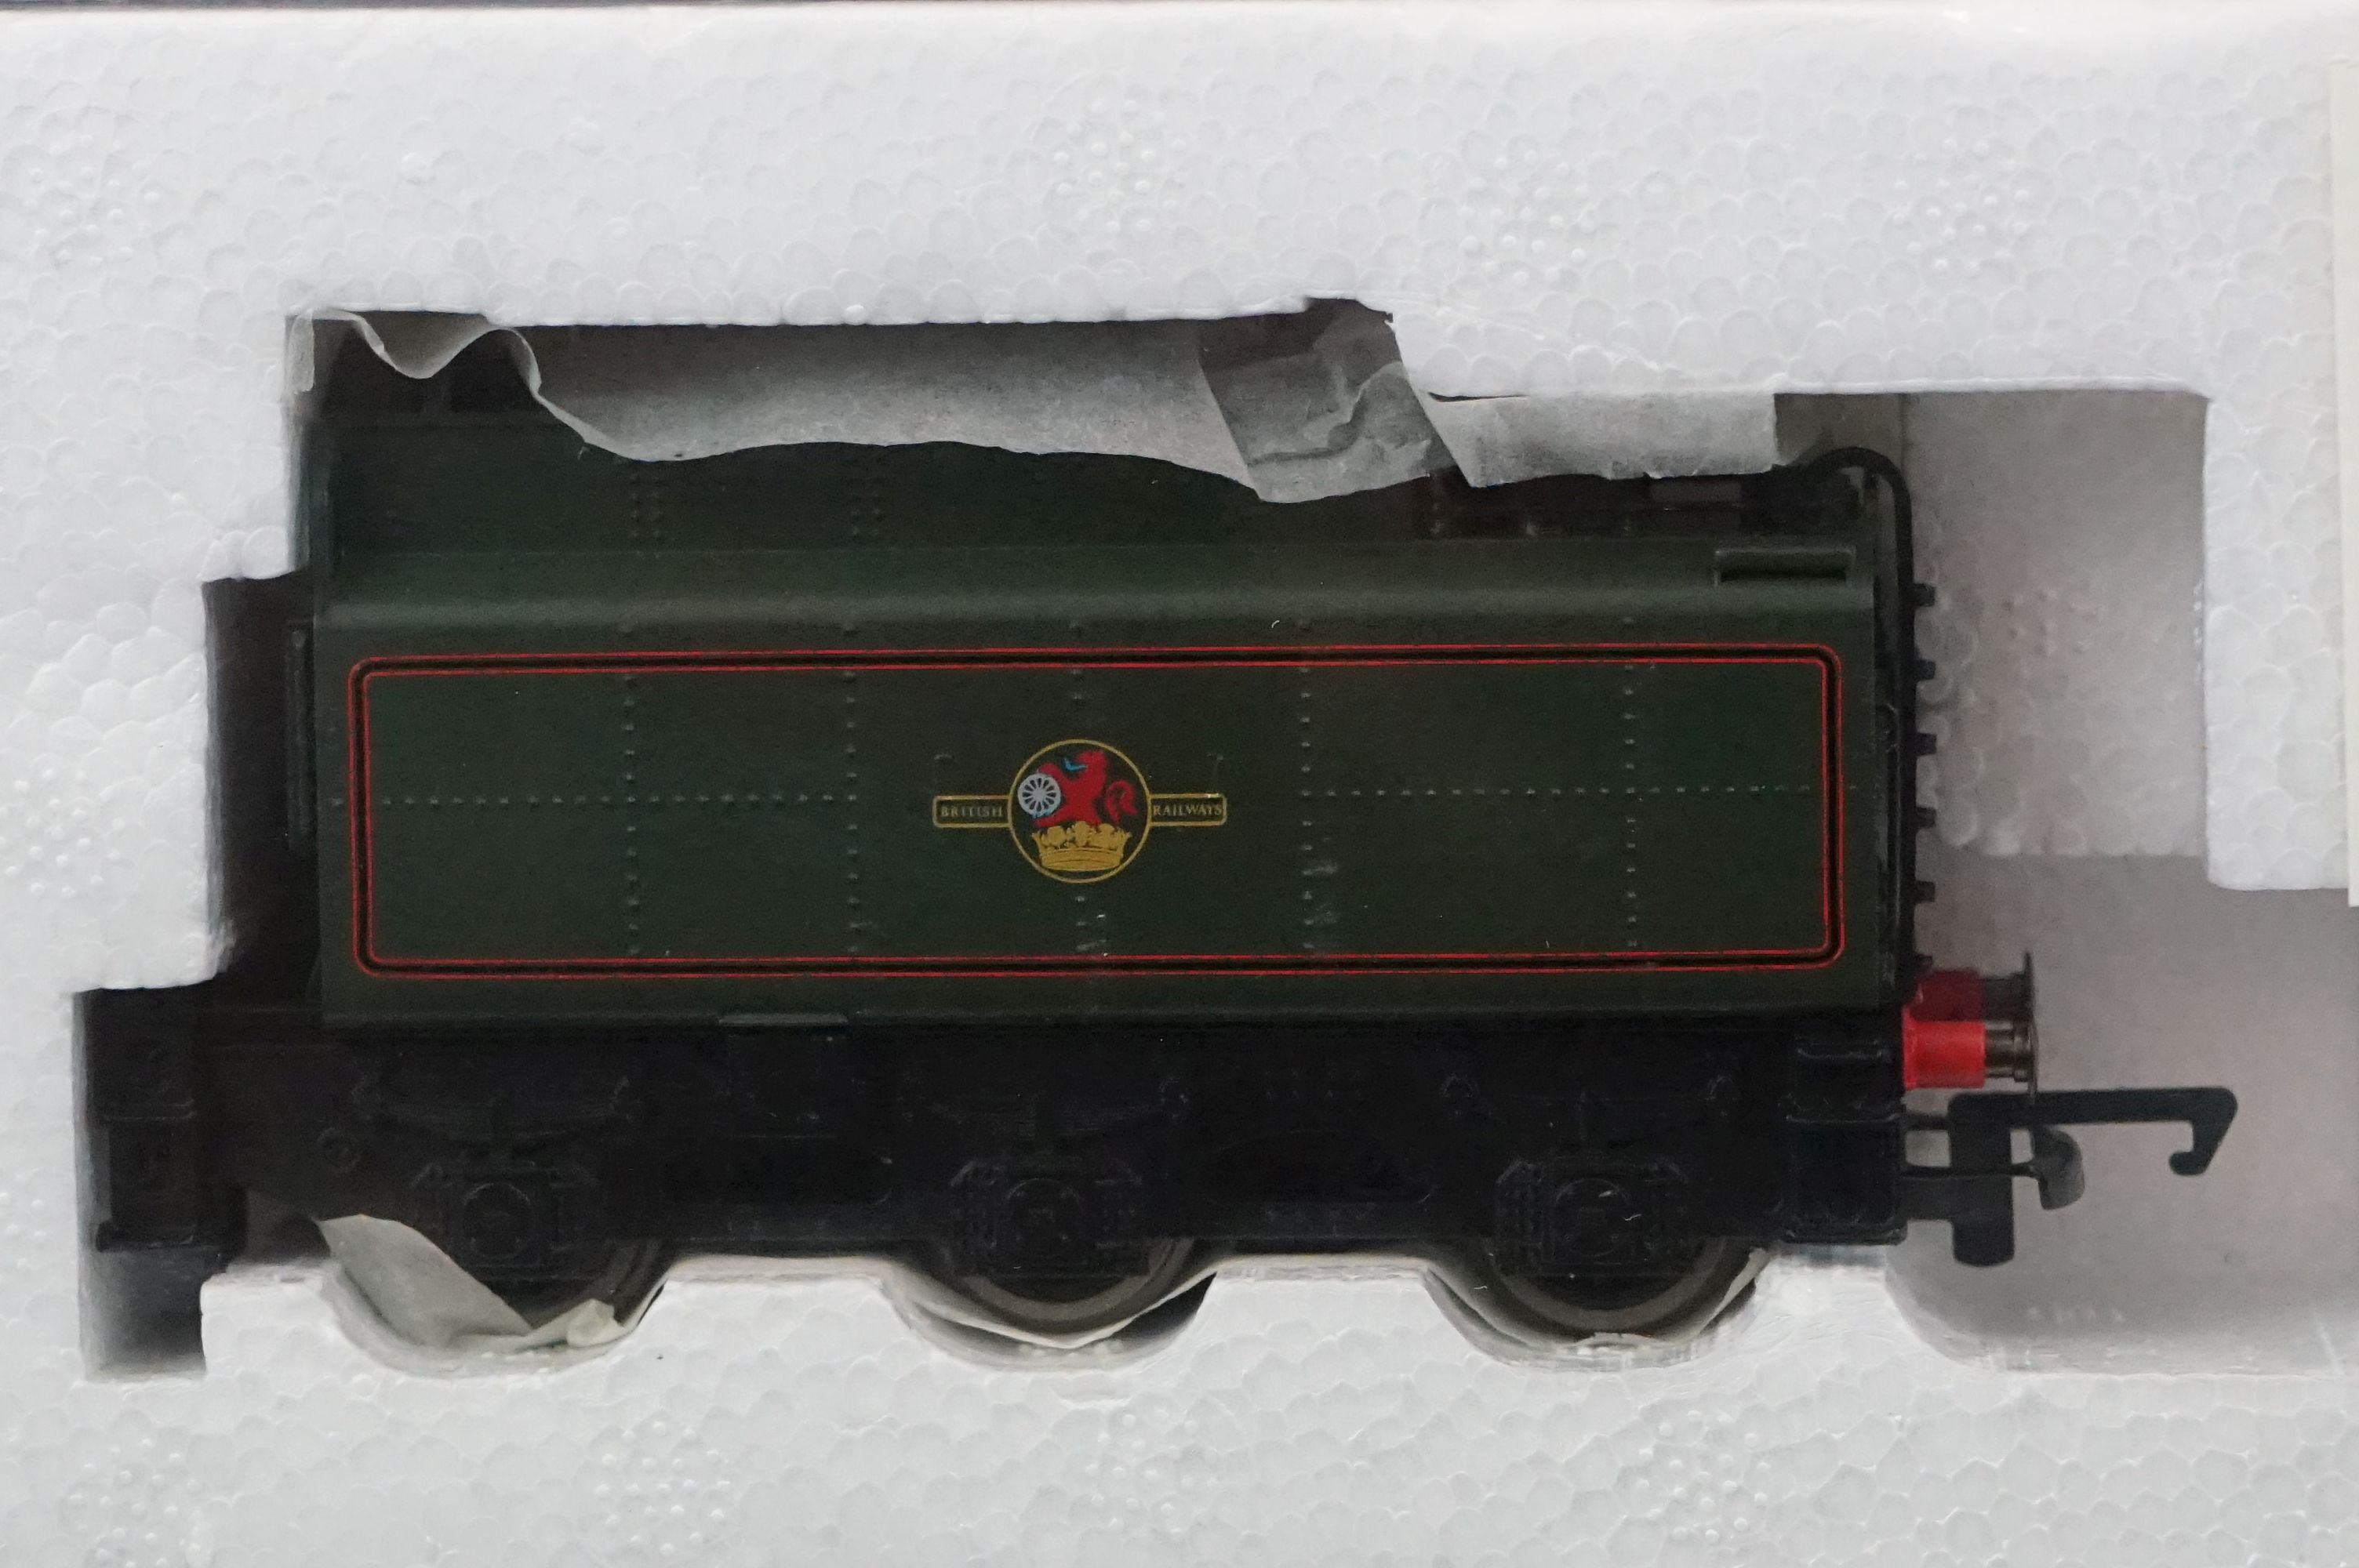 Boxed Hornby Marks & Spencer R1052 Evening Star Train Set, complete with inner packaging sealed - Image 4 of 6